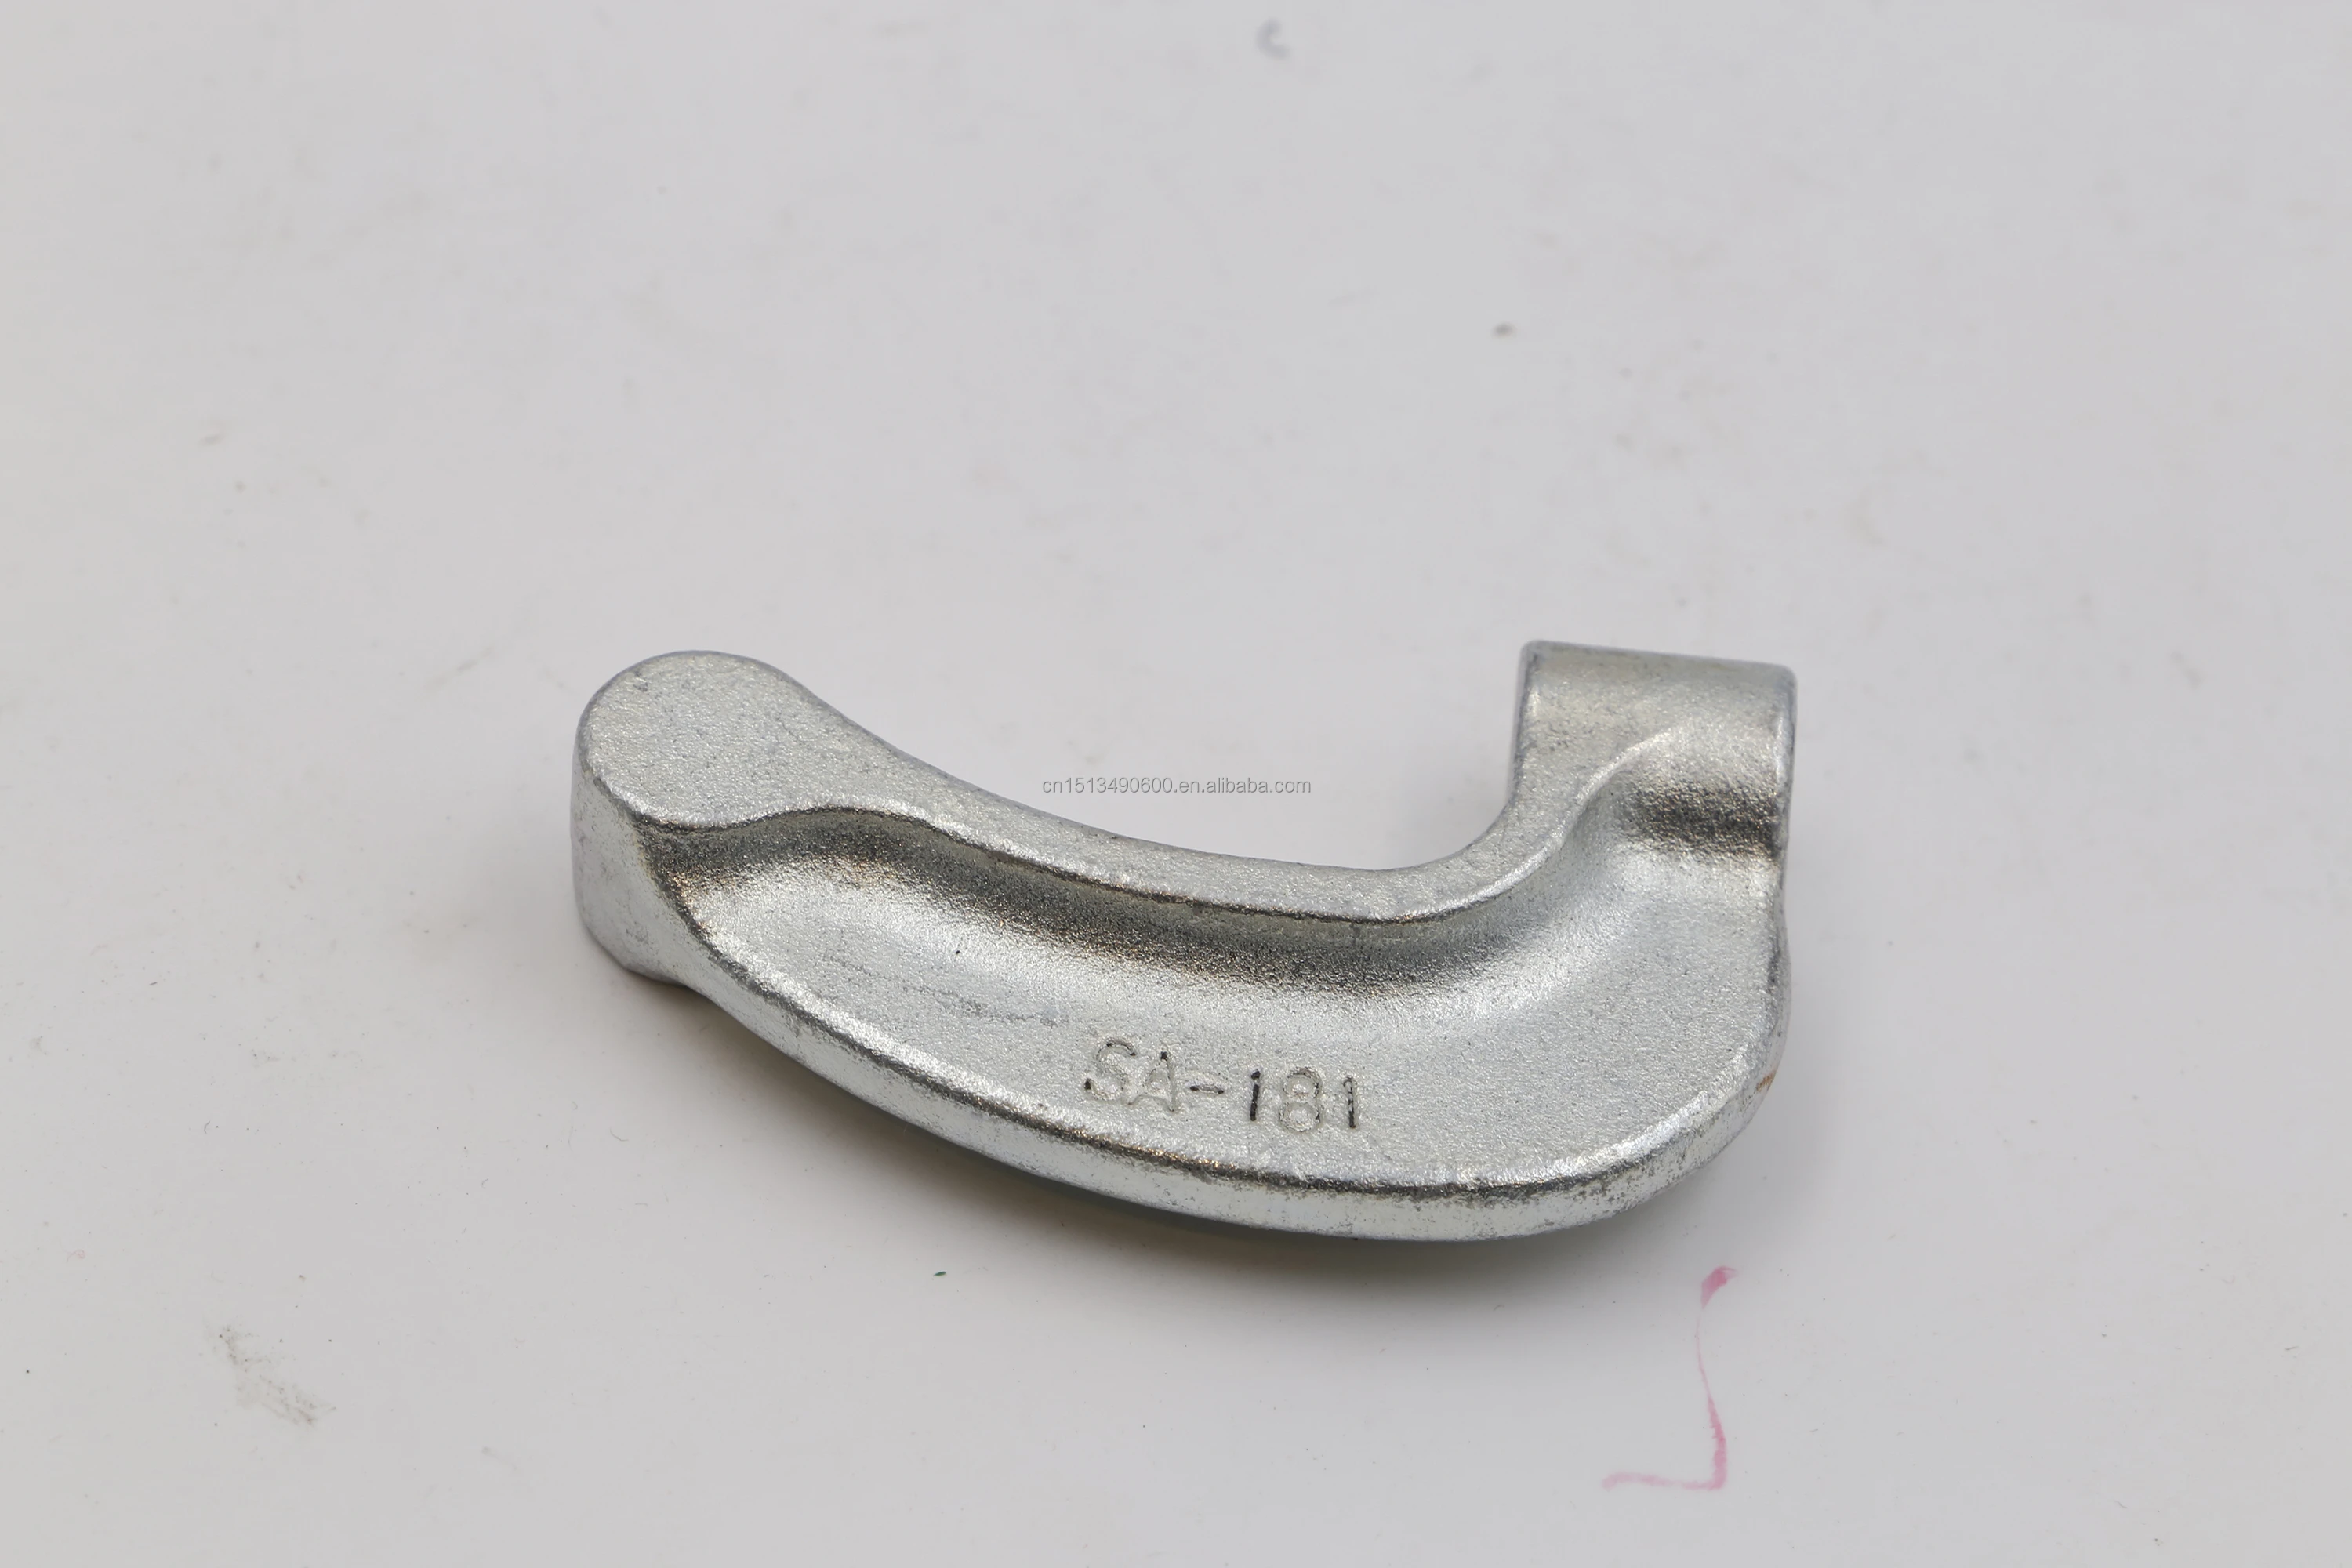 Parts Forging Machinery Parts Customized Forged Steel Forging Parts For Industry